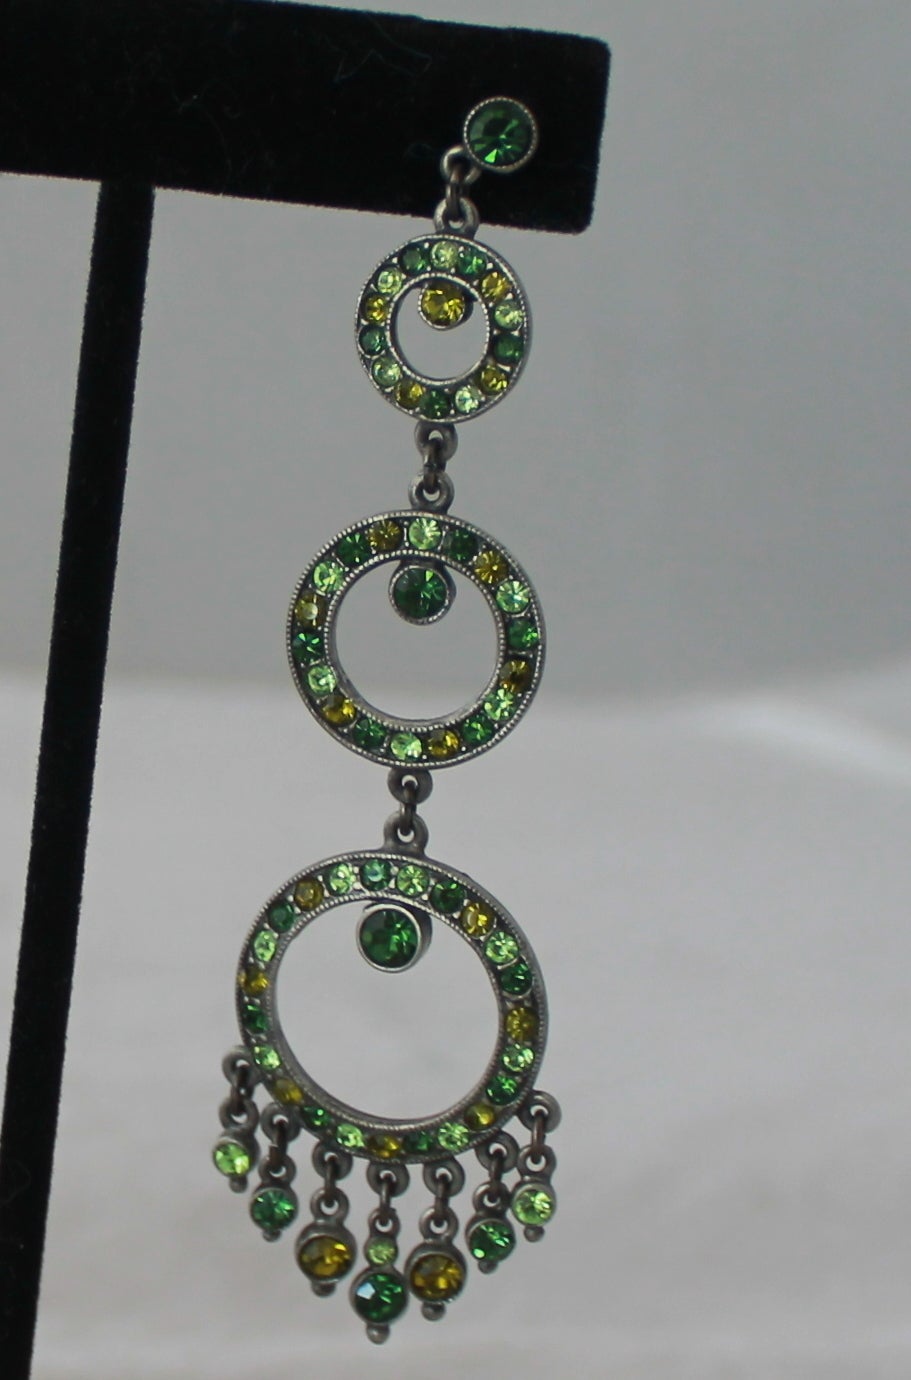 Ben Amun Green Multi-Tone Rhinestone Chandelier Earrings. These earrings are in excellent condition and are not missing any rhinestones. 

Length- 3.5